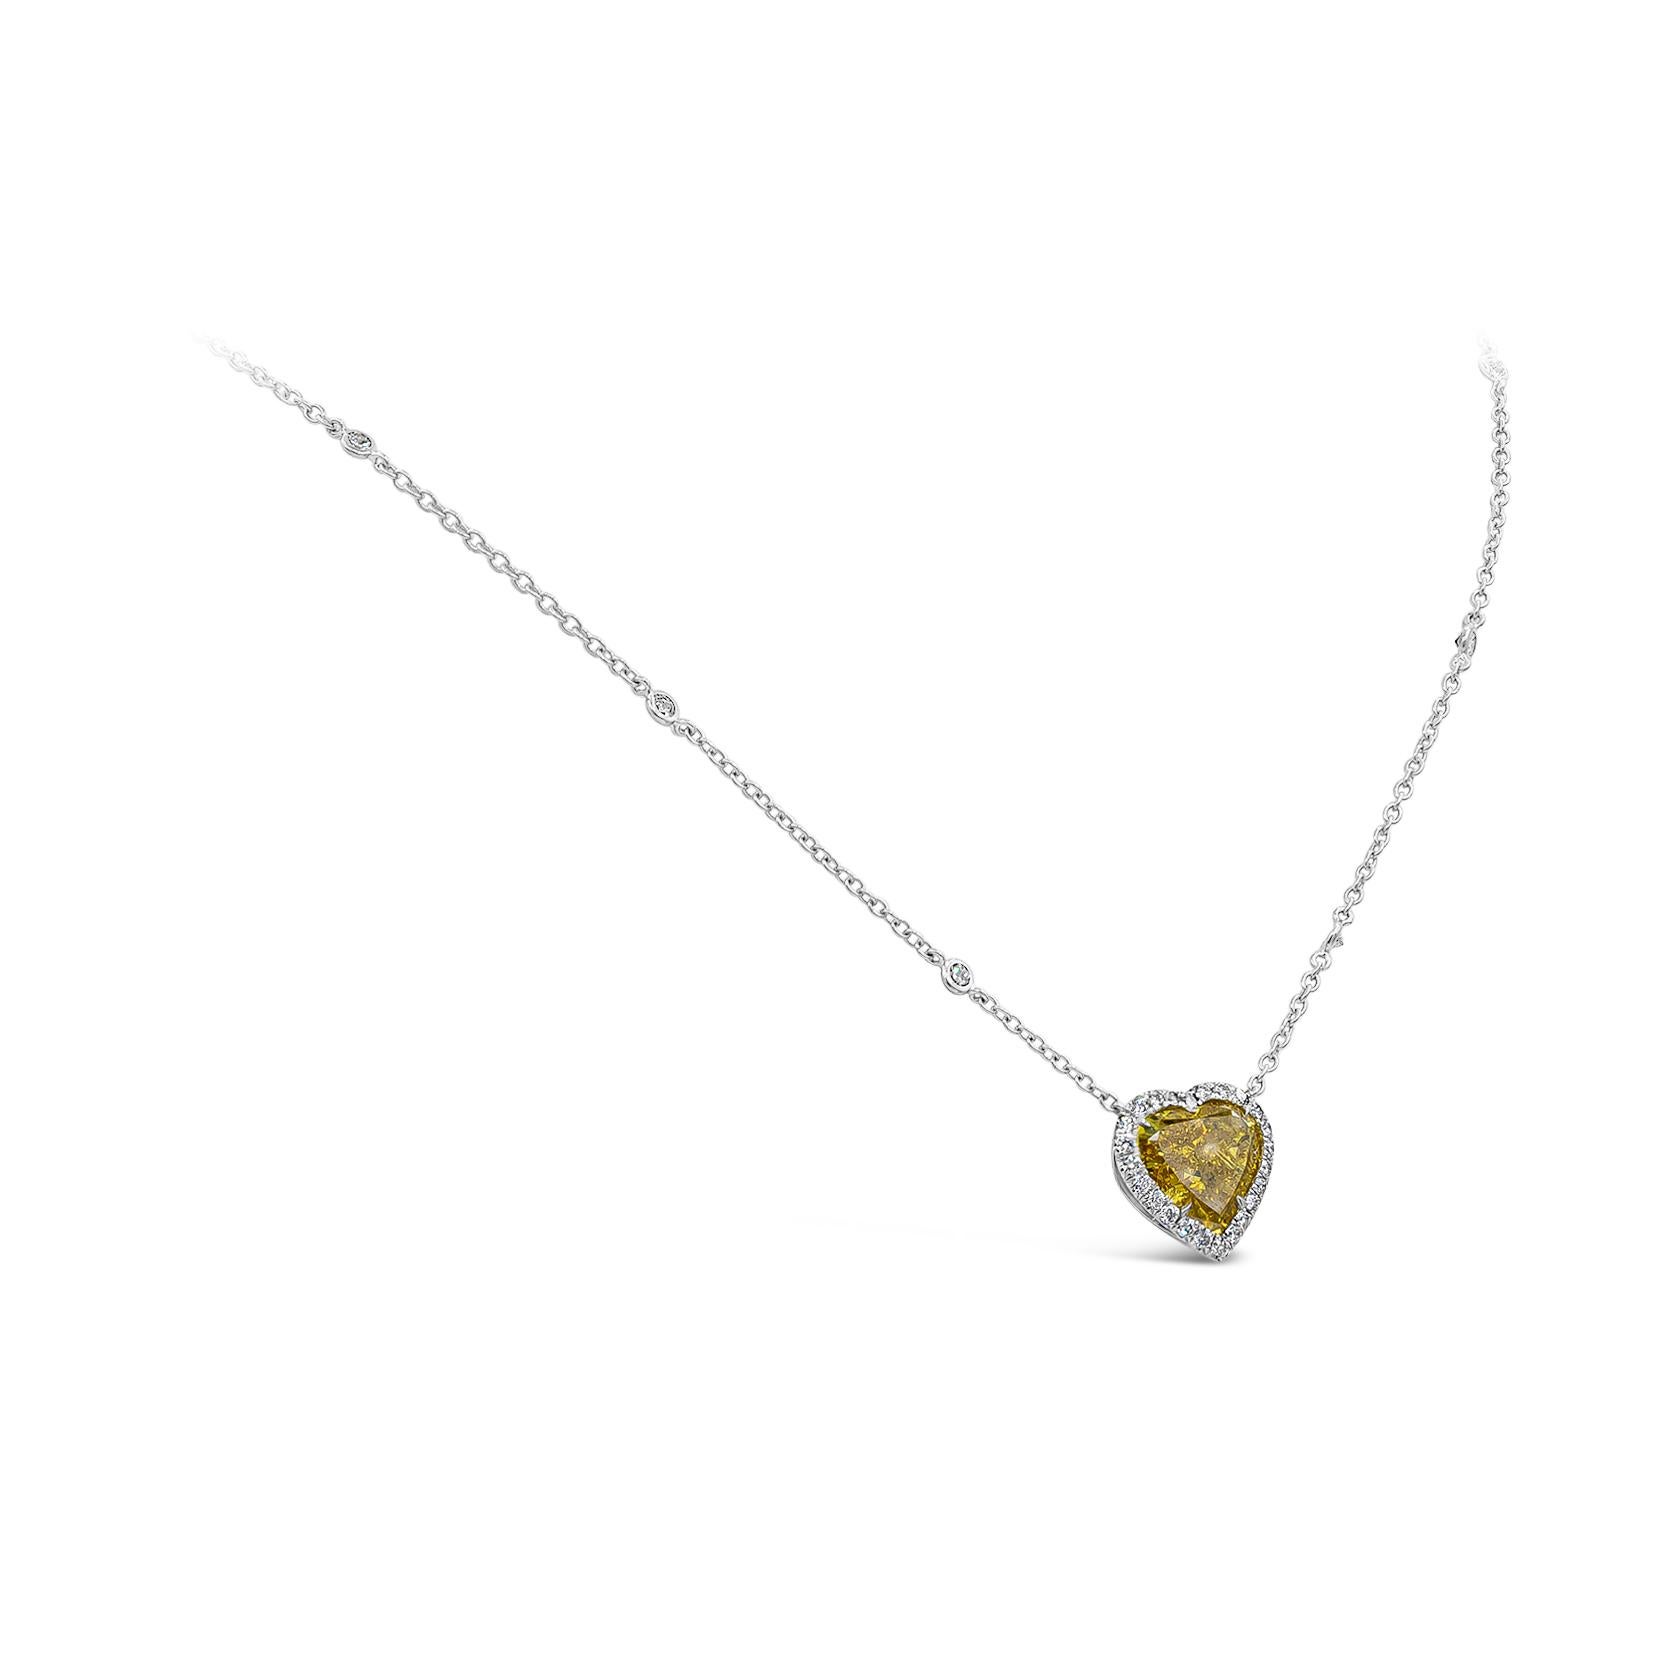 Color rich piece of high end jewelry showcasing a vibrant GIA certified 4.02 carat heart shape diamond, fancy deep orangy yellow, I1 in clarity, set in a four prong 18k white gold setting. Surrounded by a single row of white round brilliant diamonds